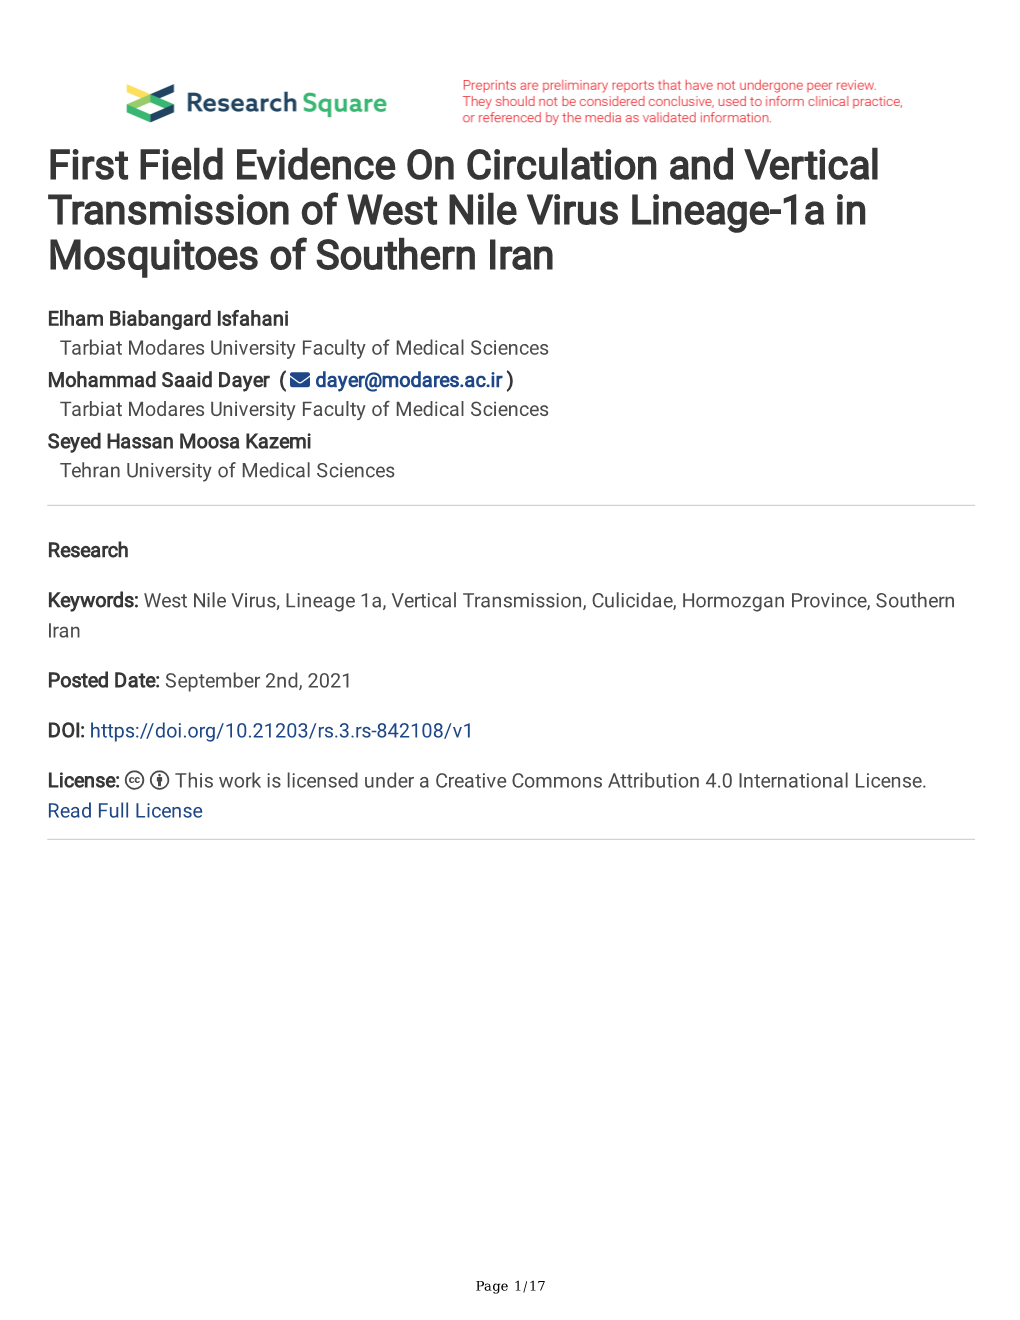 First Field Evidence on Circulation and Vertical Transmission of West Nile Virus Lineage-1A in Mosquitoes of Southern Iran